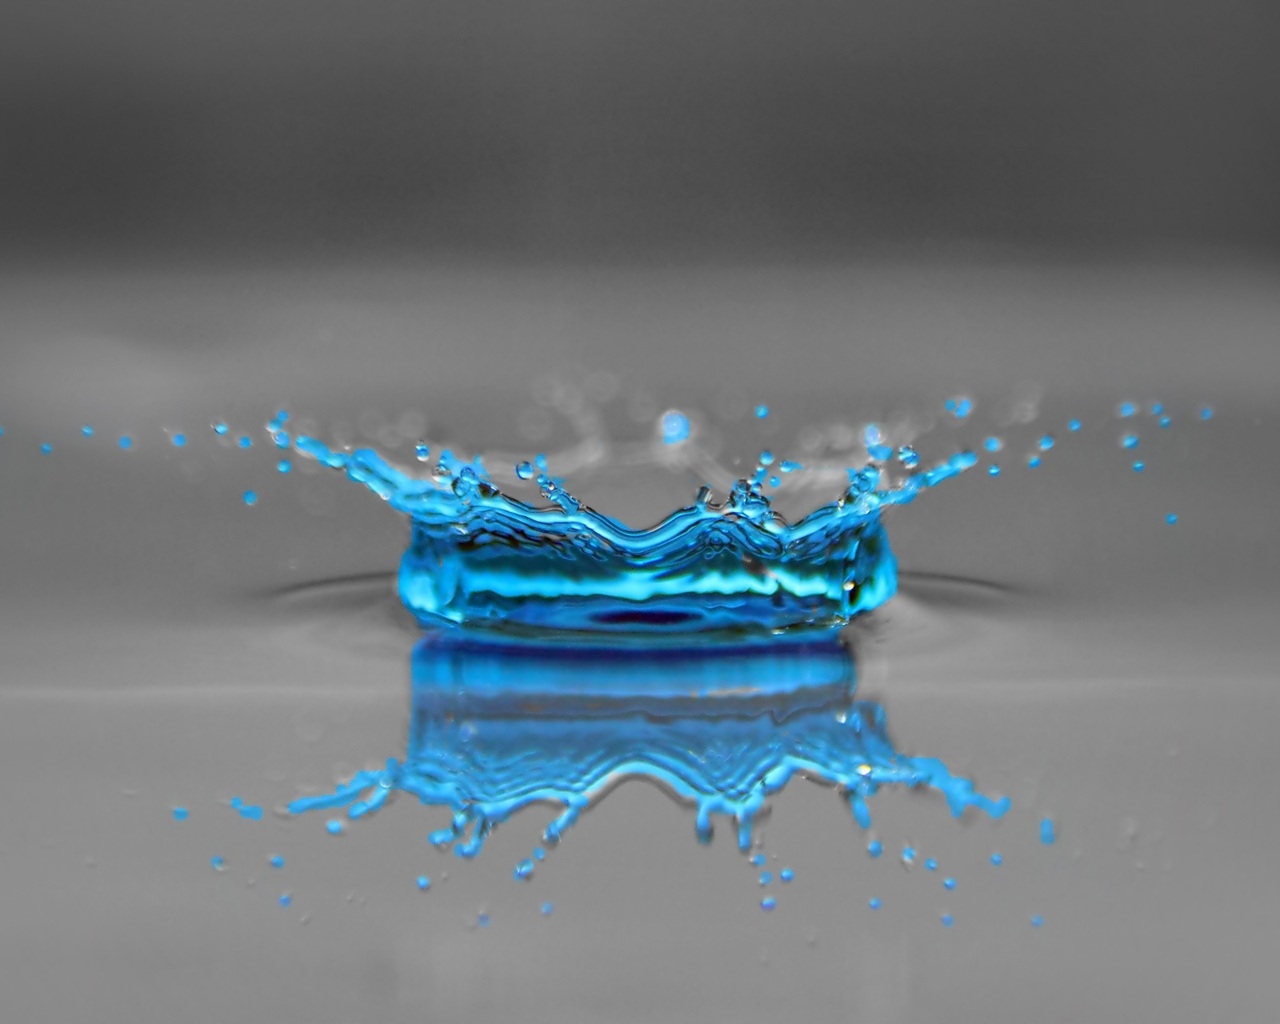 Blue Drop of Water for 1280 x 1024 resolution